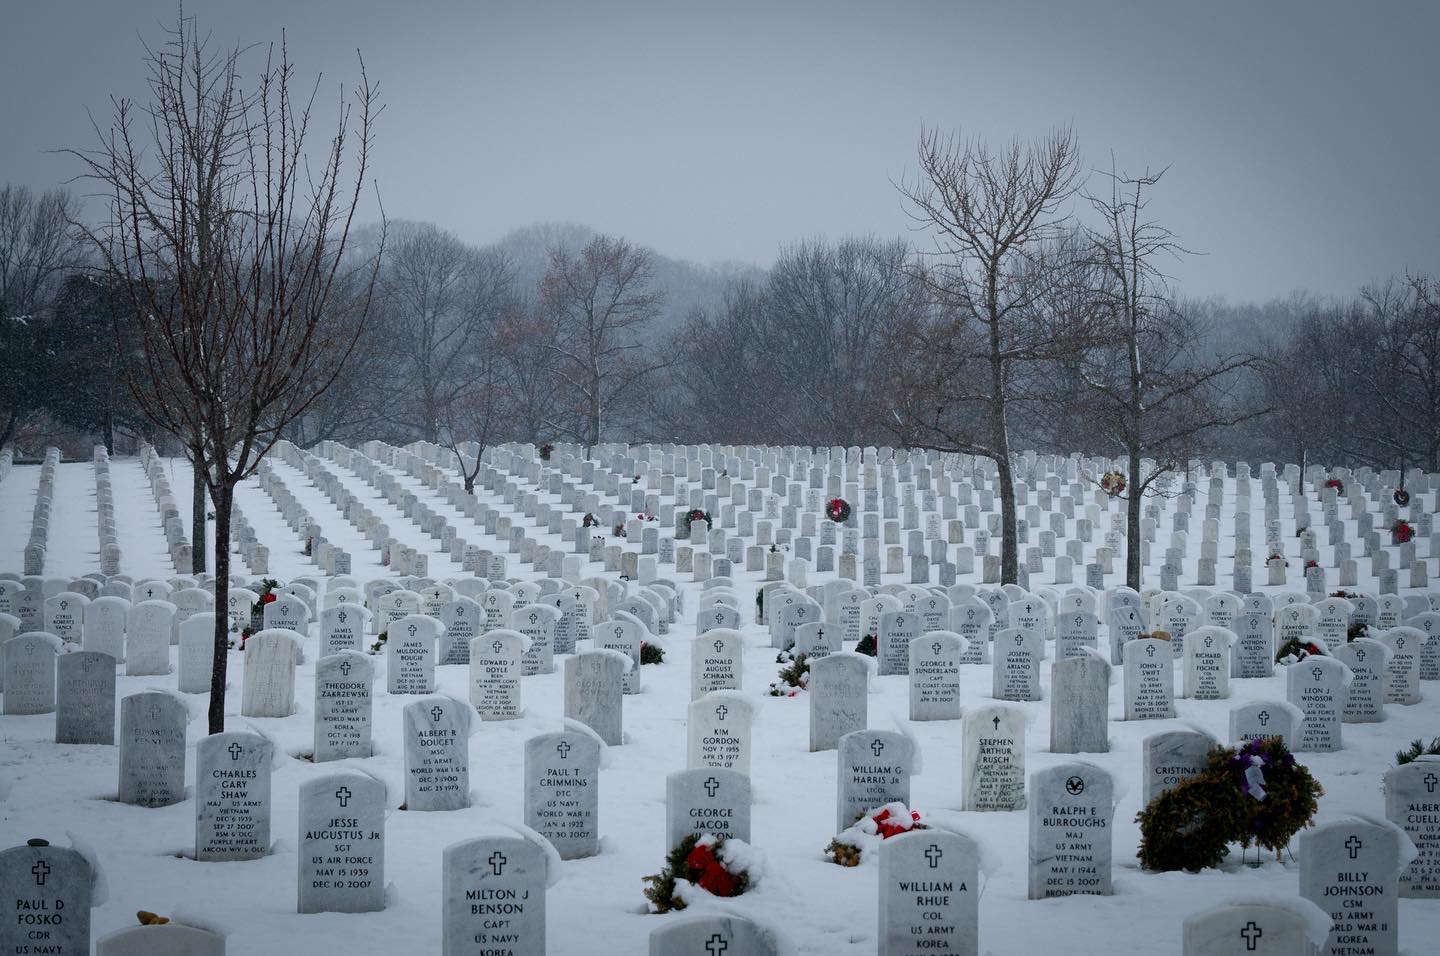 Winter Storm warnings sweep across the country as Arlington National Cemetery prepares for more snow to sweep across these hallowed grounds.

Snow-covered headstones can be seen here in Section 64 of Arlington National Cemetery in Arlington, Virginia as captured by @arlingtonmedia